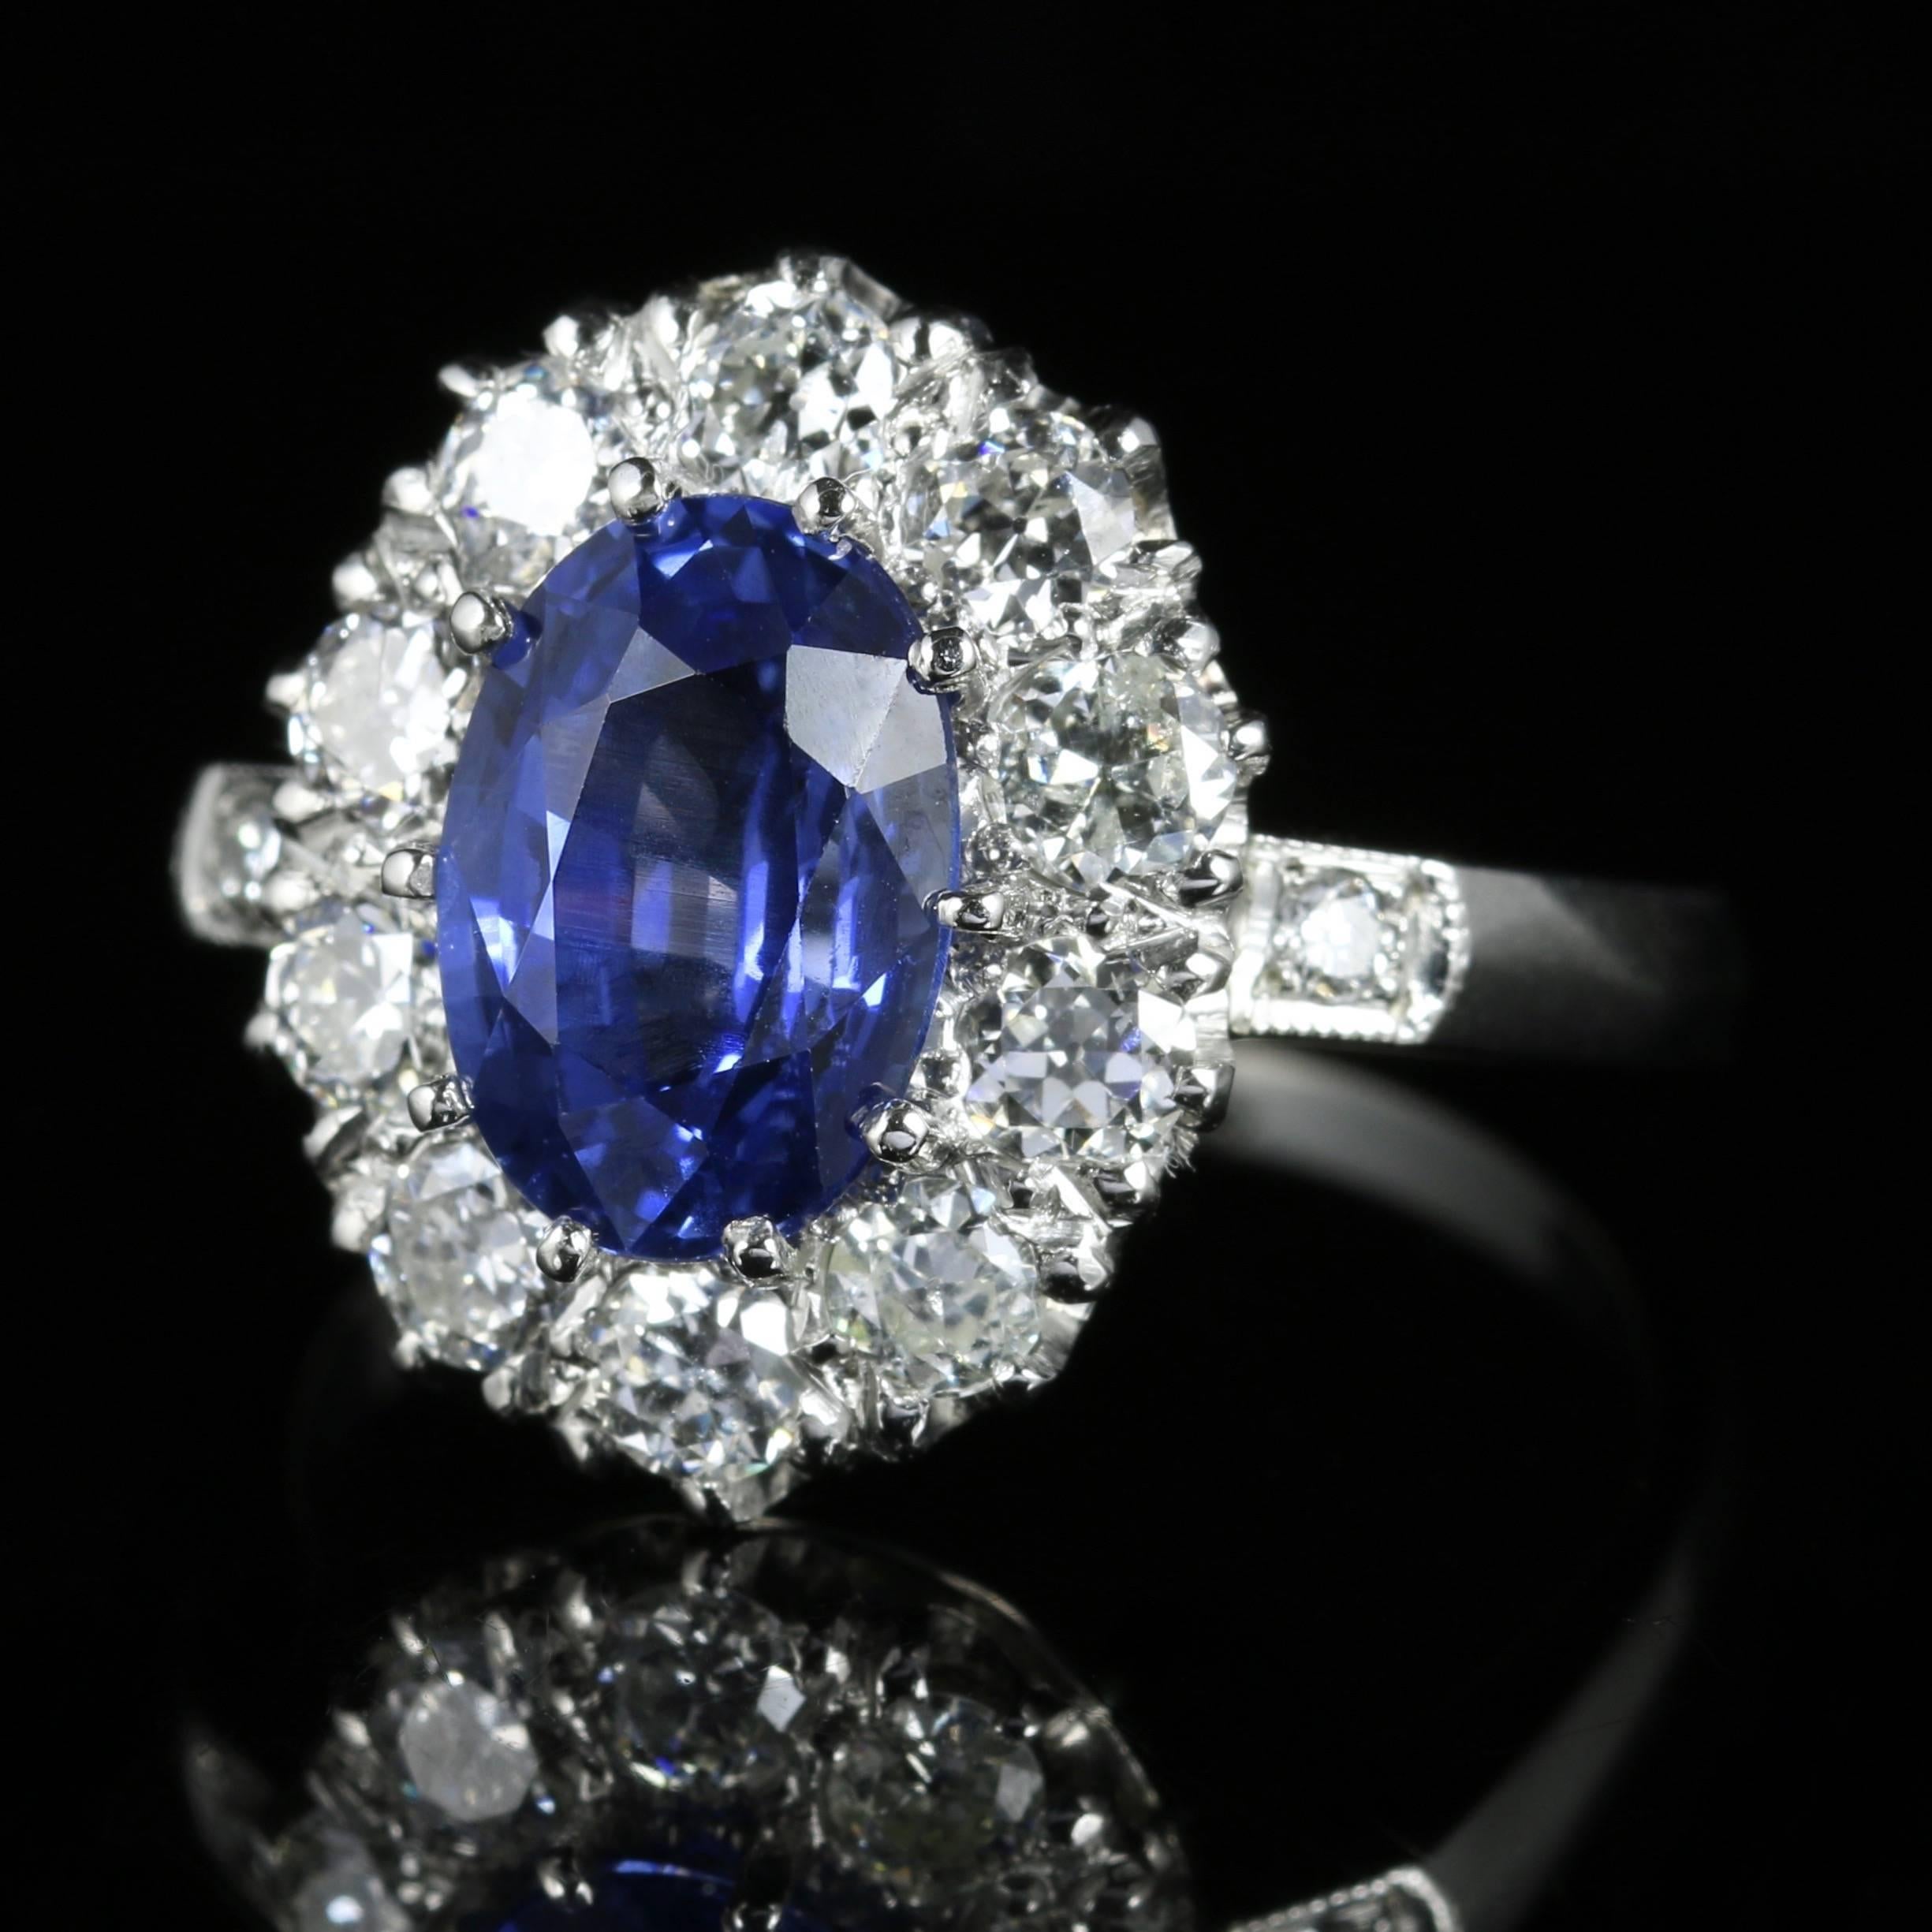 For more details please click continue reading down below..

This fabulous all Platinum Edwardian ring is set with the most breathtakingly beautiful natural Ceylon untreated Sapphire, with certificate.

Circa 1910

The Sapphire weighs 2.64ct in size